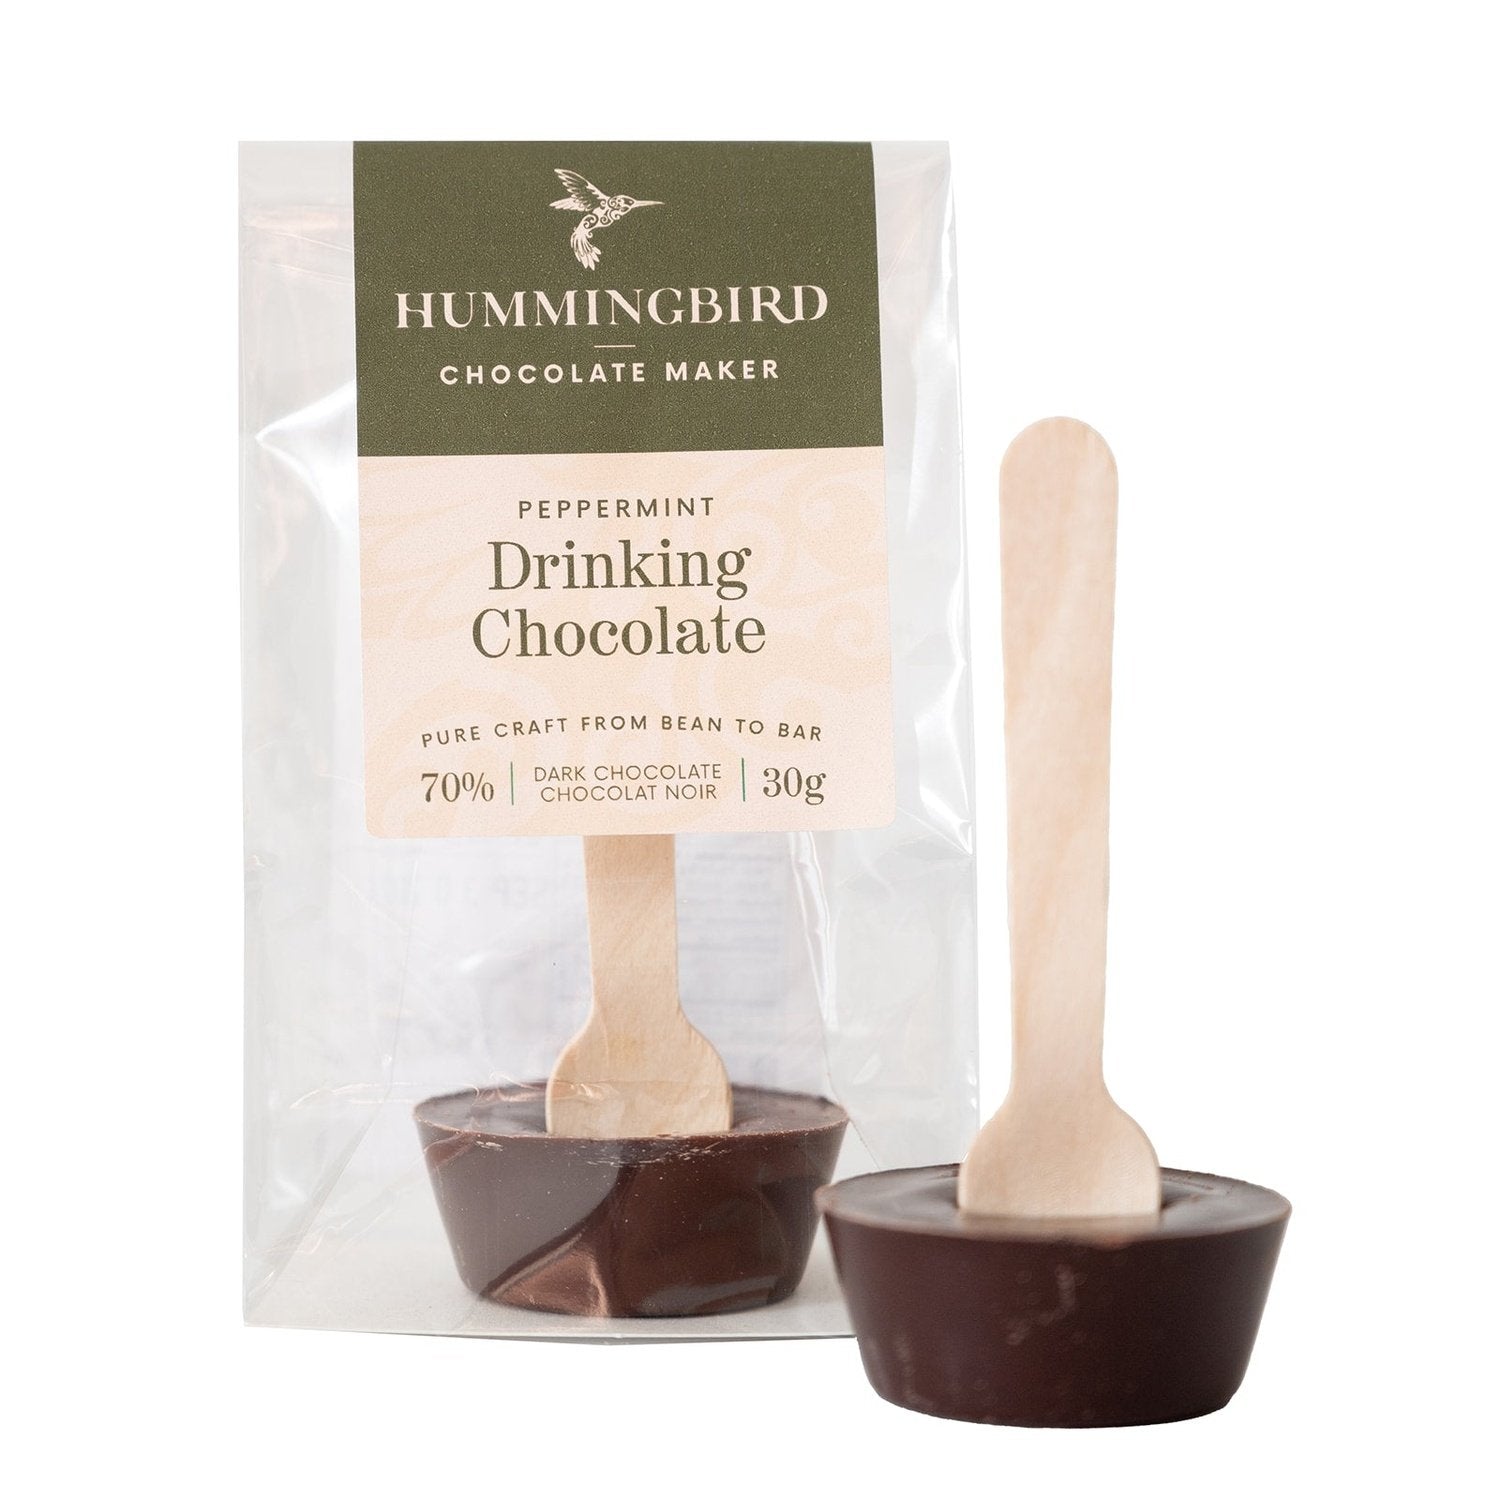 Two peppermint drinking chocolate spoons, made with bean to bar single origin dark chocolate and mixed with pure peppermint essential oil